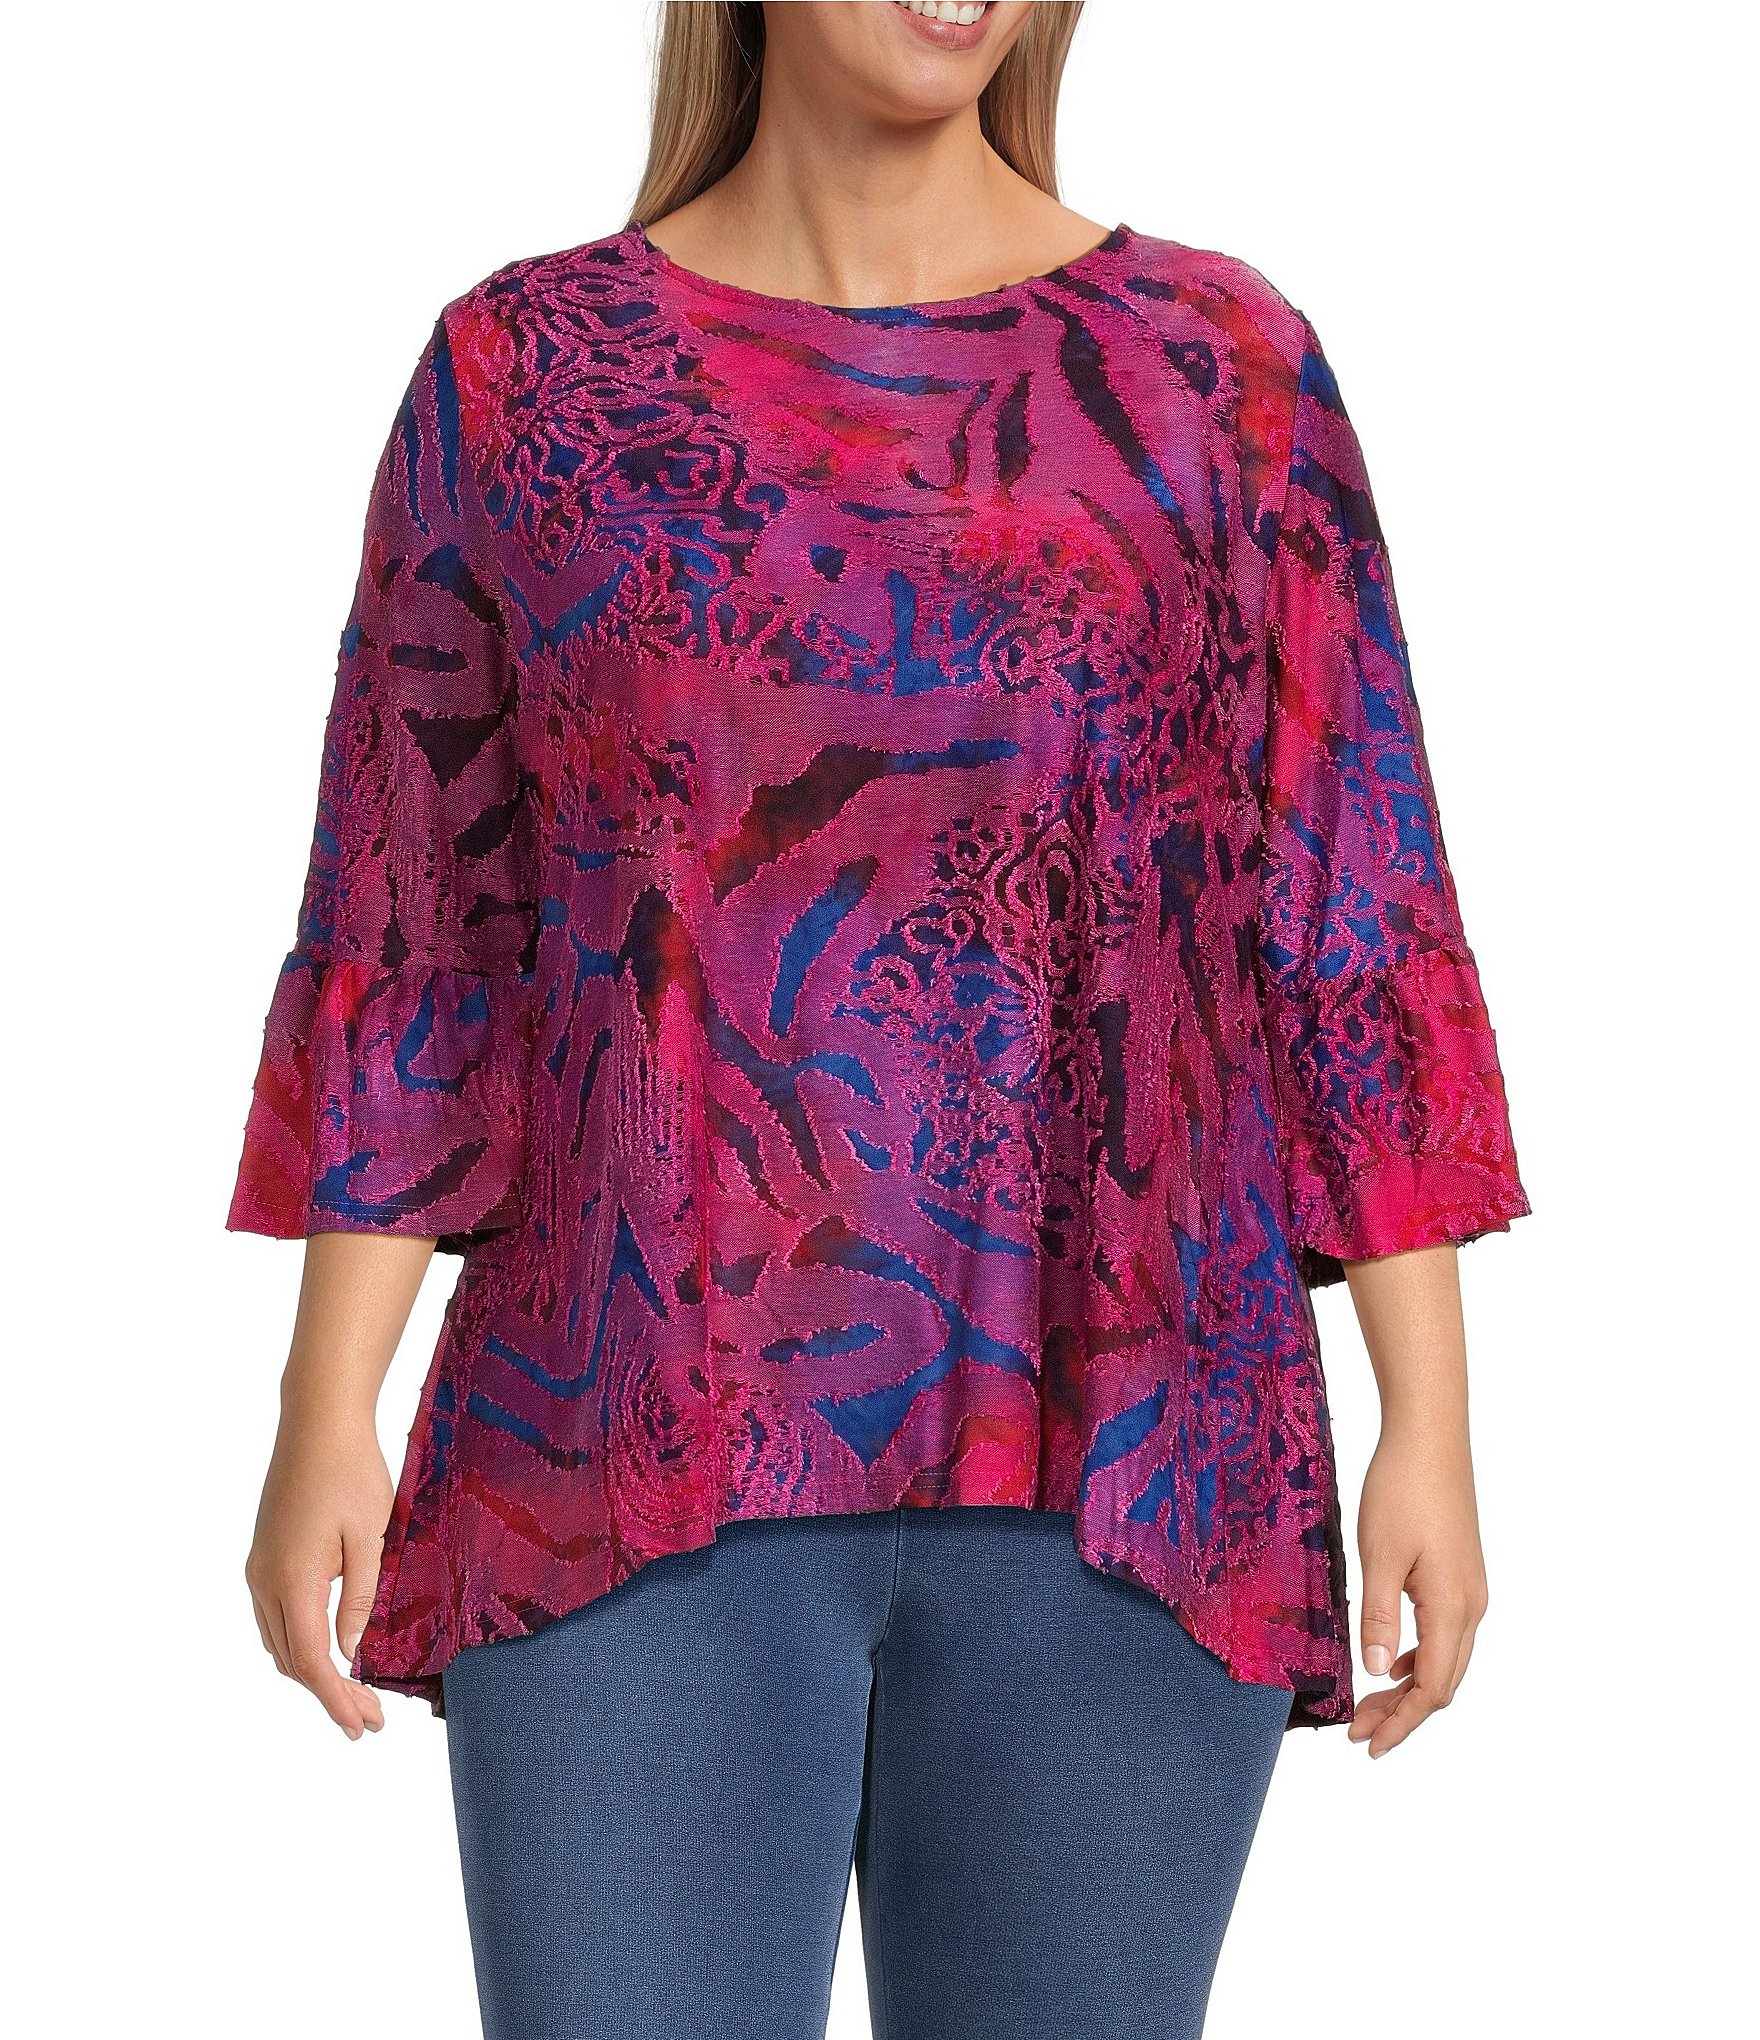 Calessa Plus Size Textured Knit Burnout Tie Dye 3/4 Bell Sleeve Blouse ...